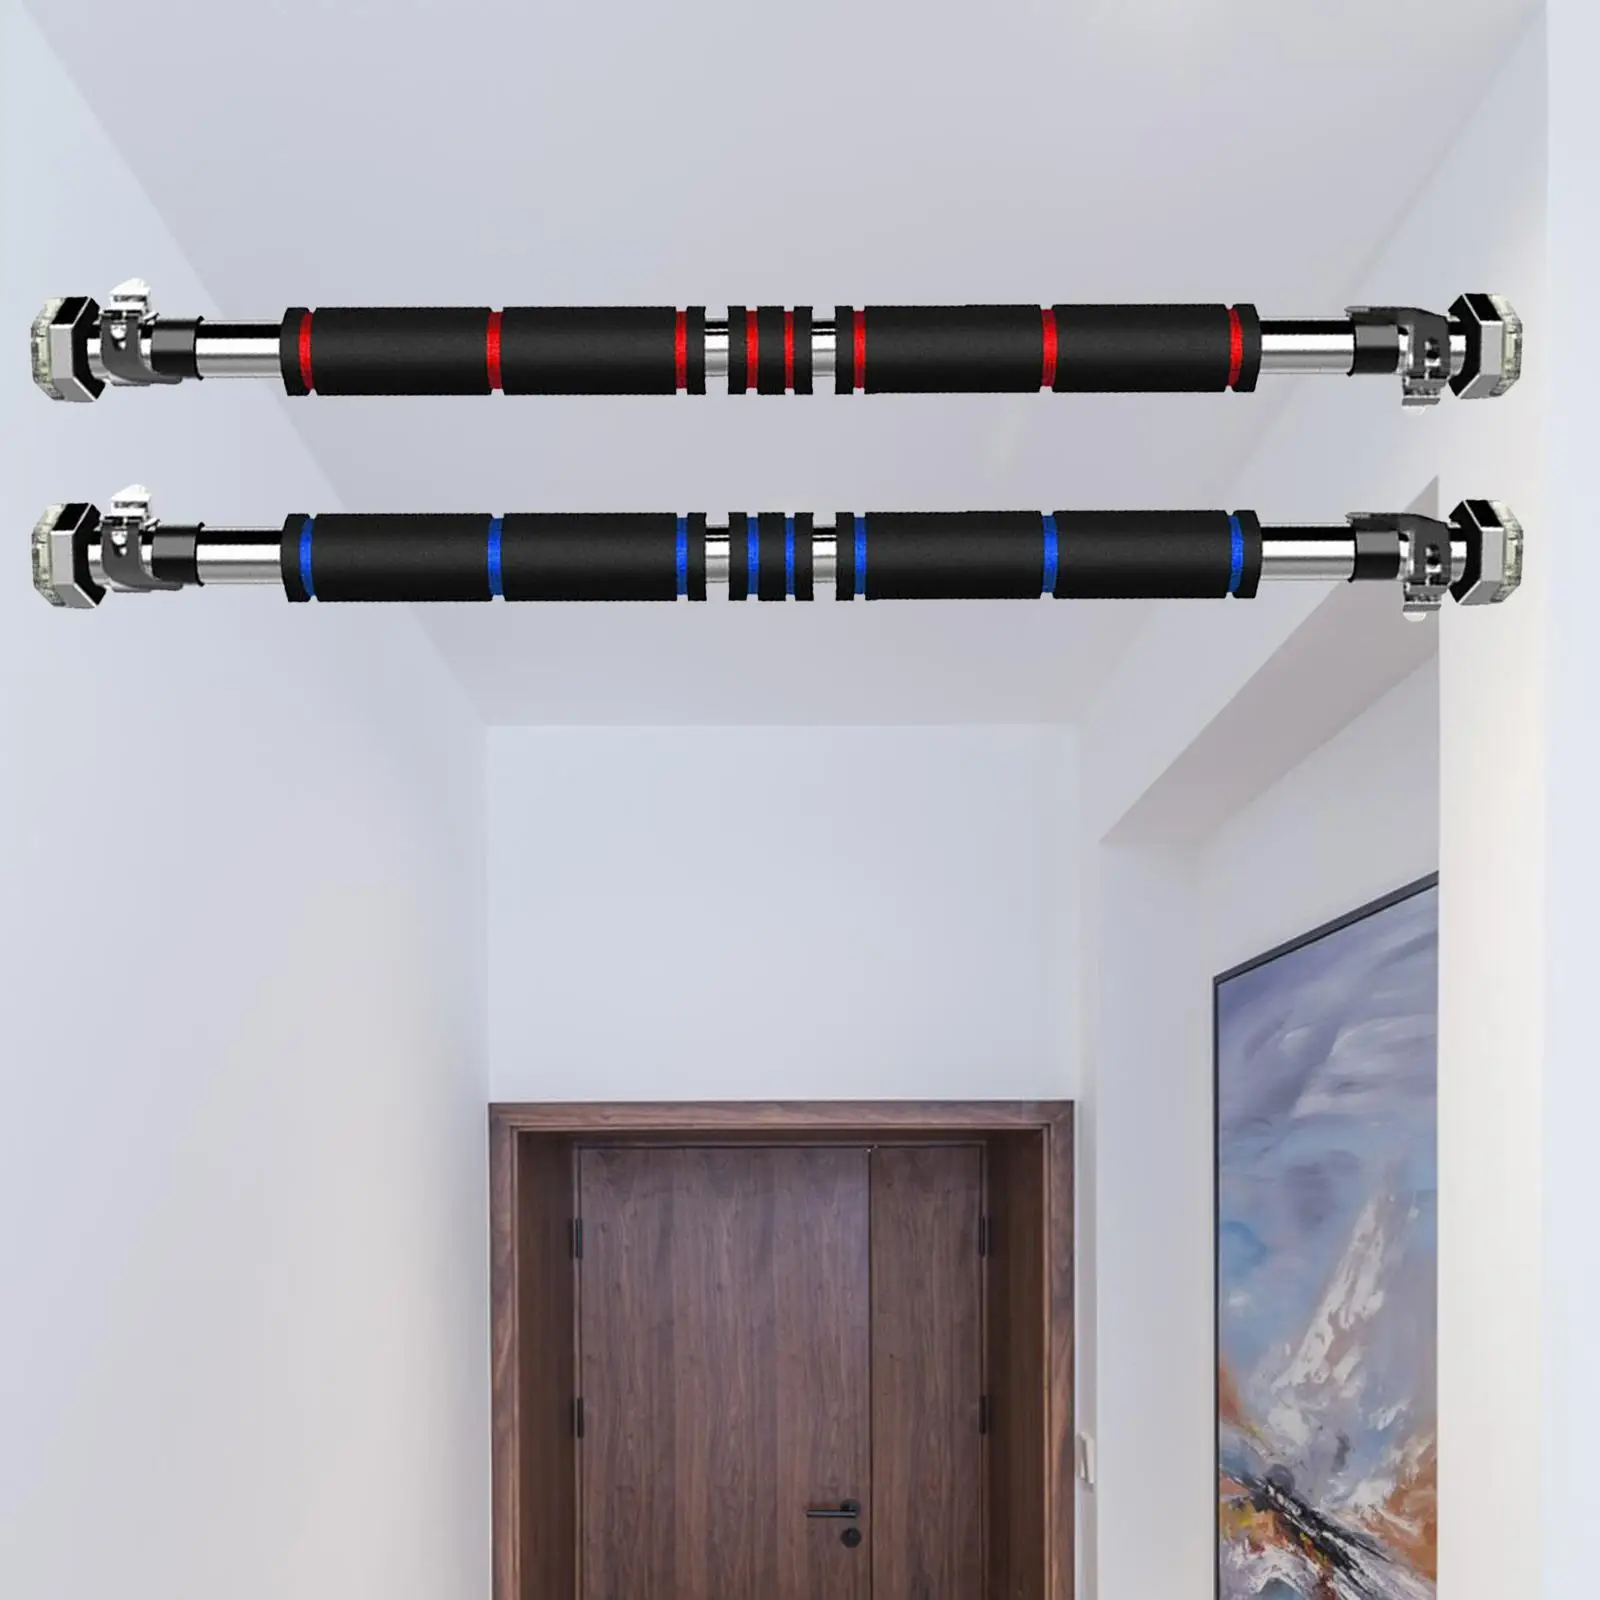 Screwless Pull Up Bar Door Opening Adjustable Pull Up Bar Mounted on The Gym for